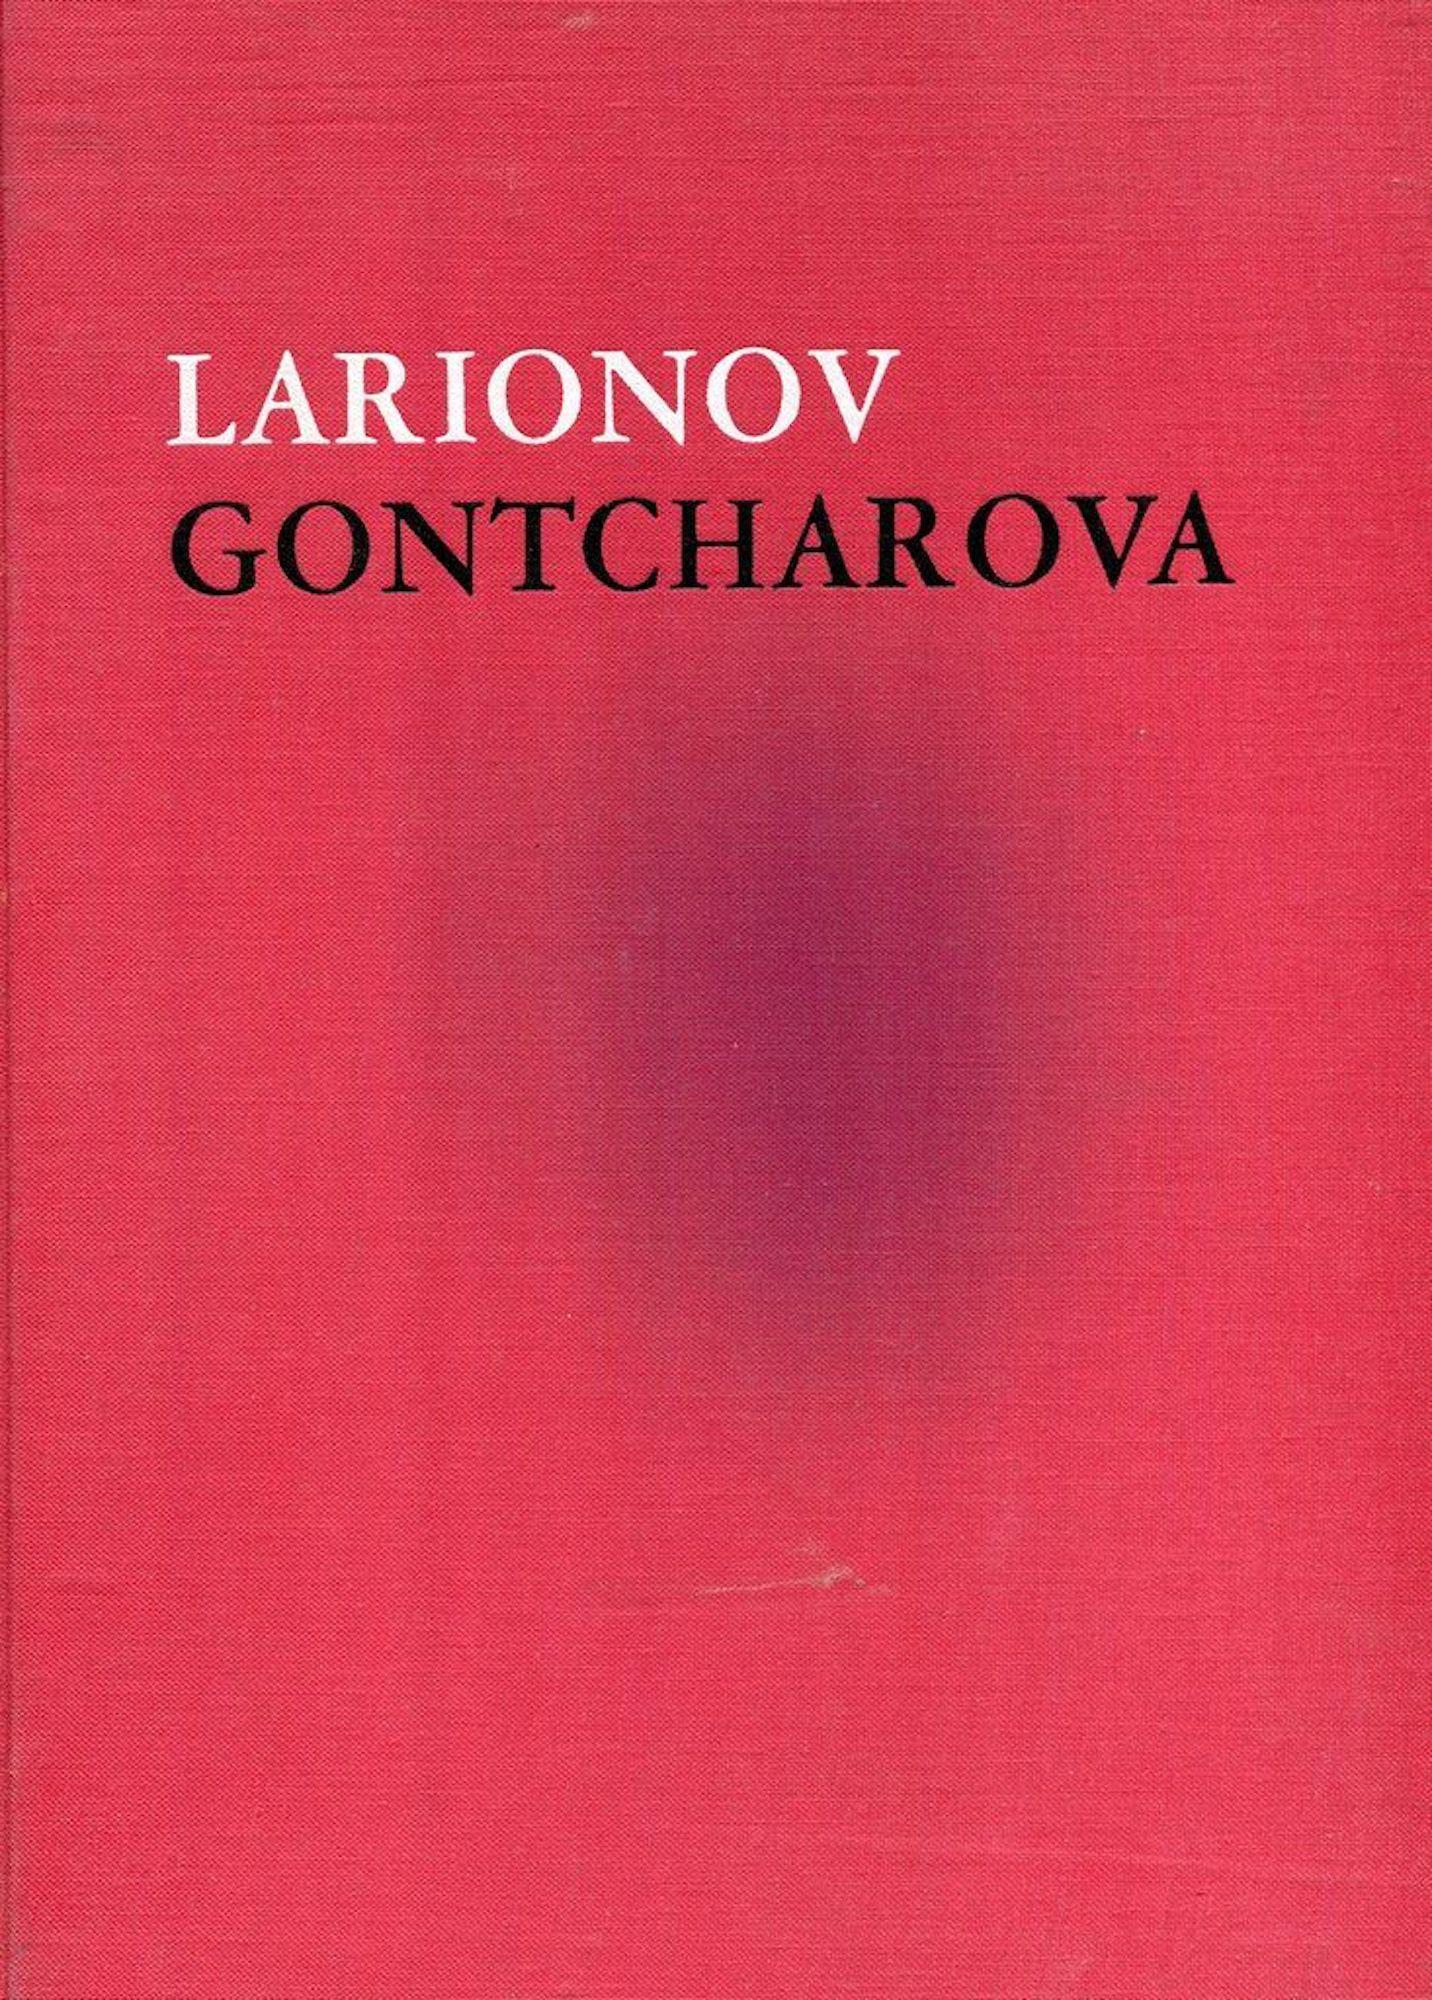 Larionov/Gontcharova - Suite of Engravings by M. Larionov and N. Gontharova-1965 - Art by Mikhail Larionov